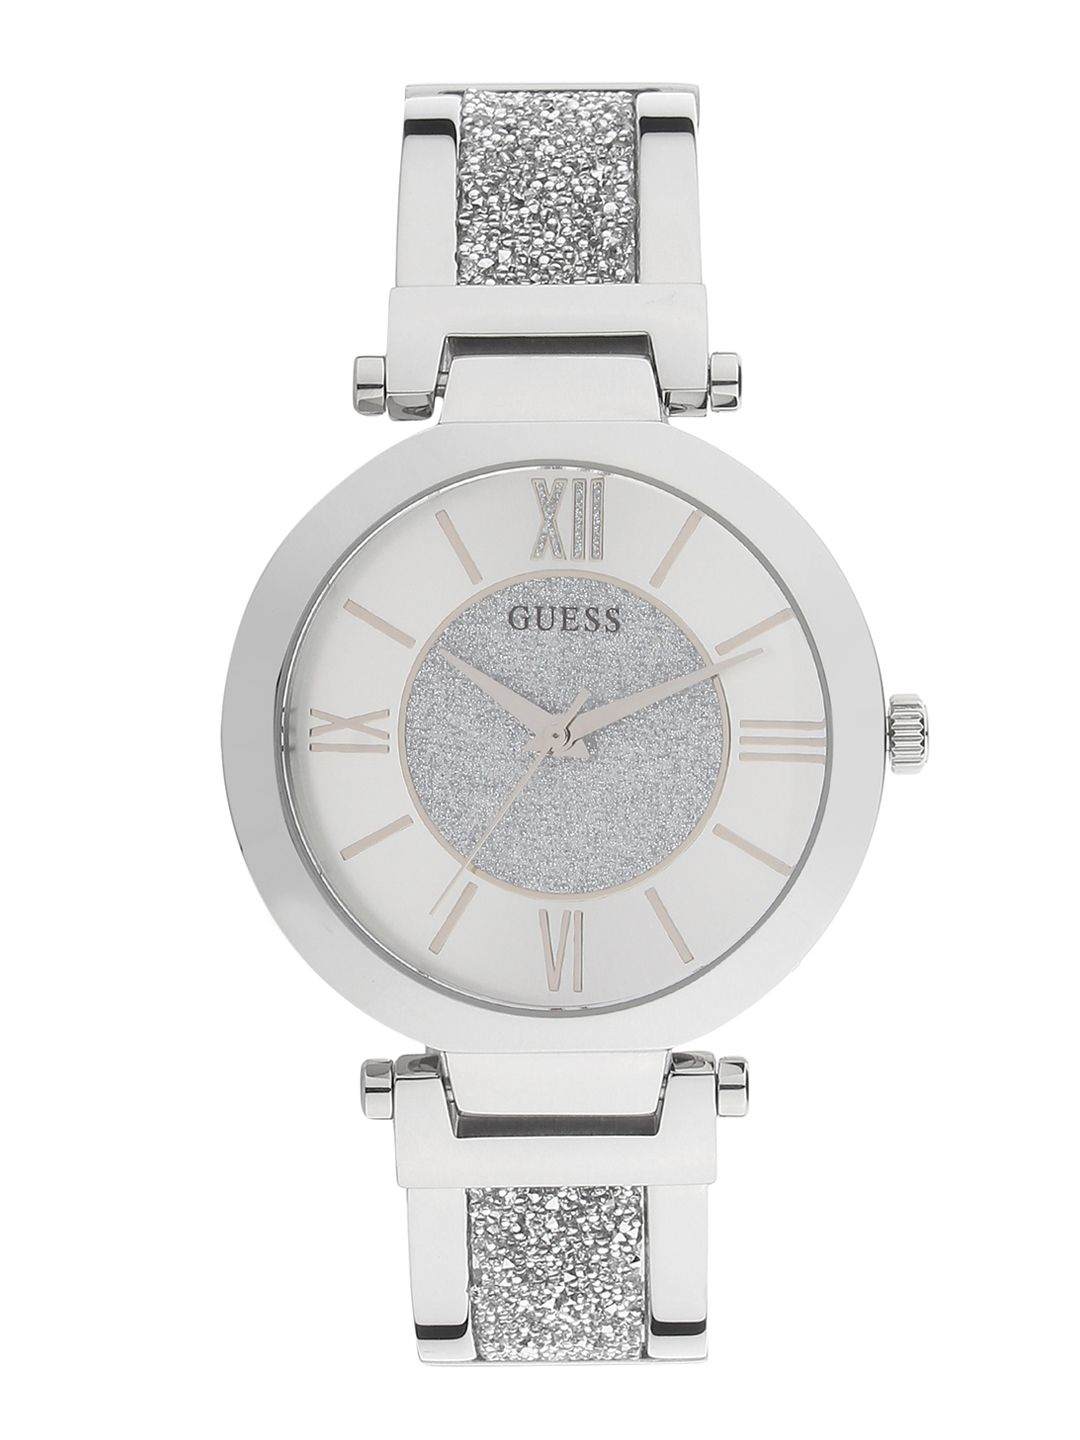 GUESS Women Silver-Toned Analogue Watch W1288L1 Price in India